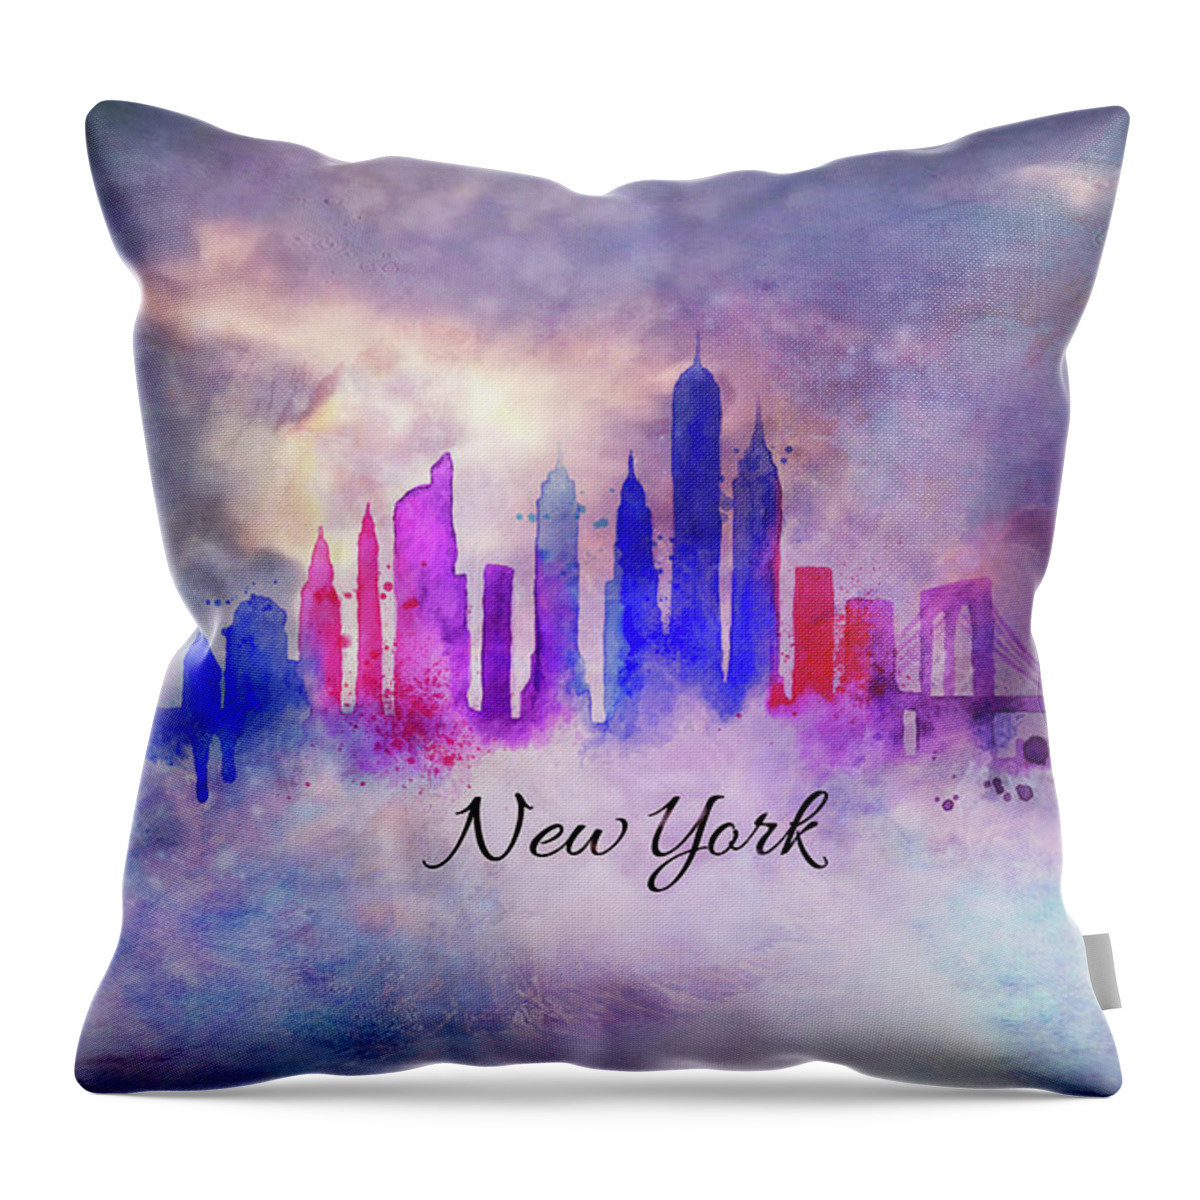 New York Skyline Throw Pillow featuring the painting New york city skyline in watercolor by Lilia S